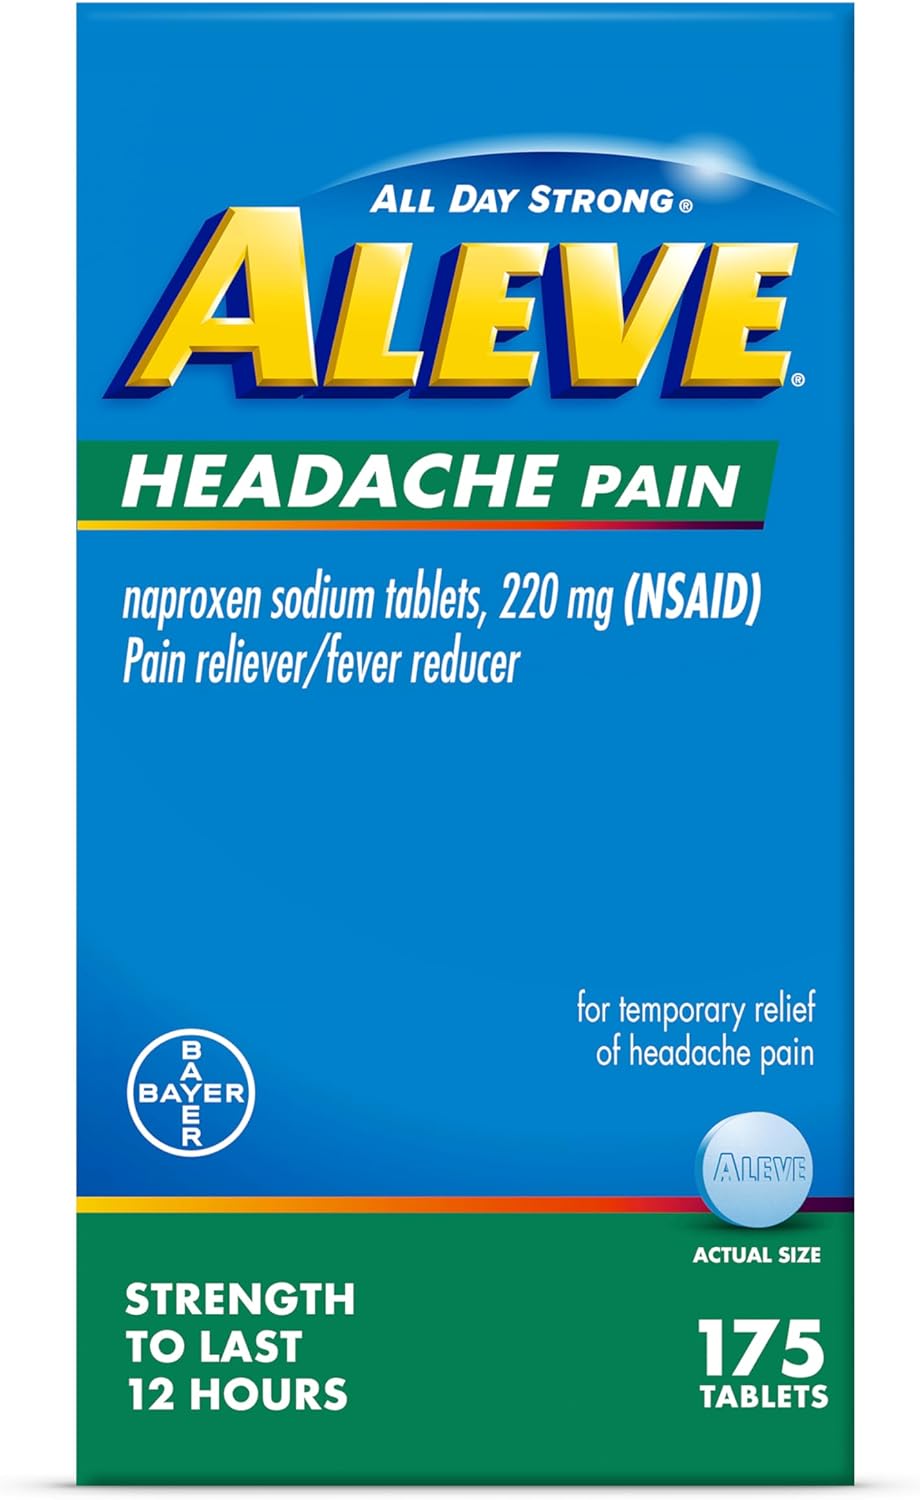 Aleve Headache Pain Reliever & Fever Reducer Tablets, Naproxen Sodium, for Headache Pain Relief, Pain Medicine for Adults, Headache Pain Relief Pills, 175 Count